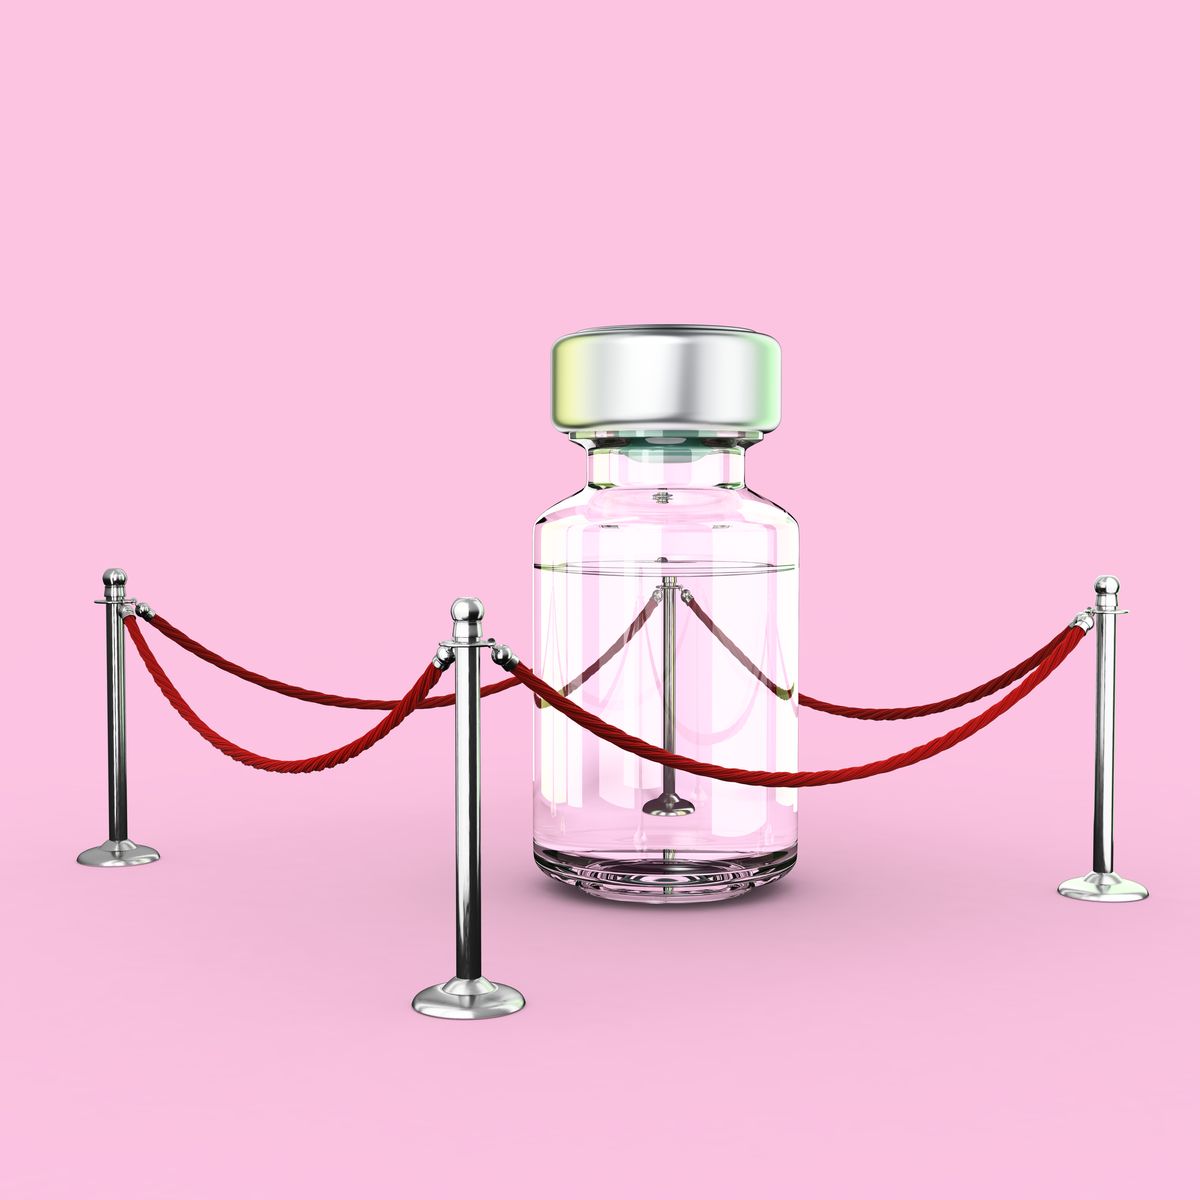 a bottle containing medical liquid stands alone inside a red roped area on a pale pink backdrop, low angle view